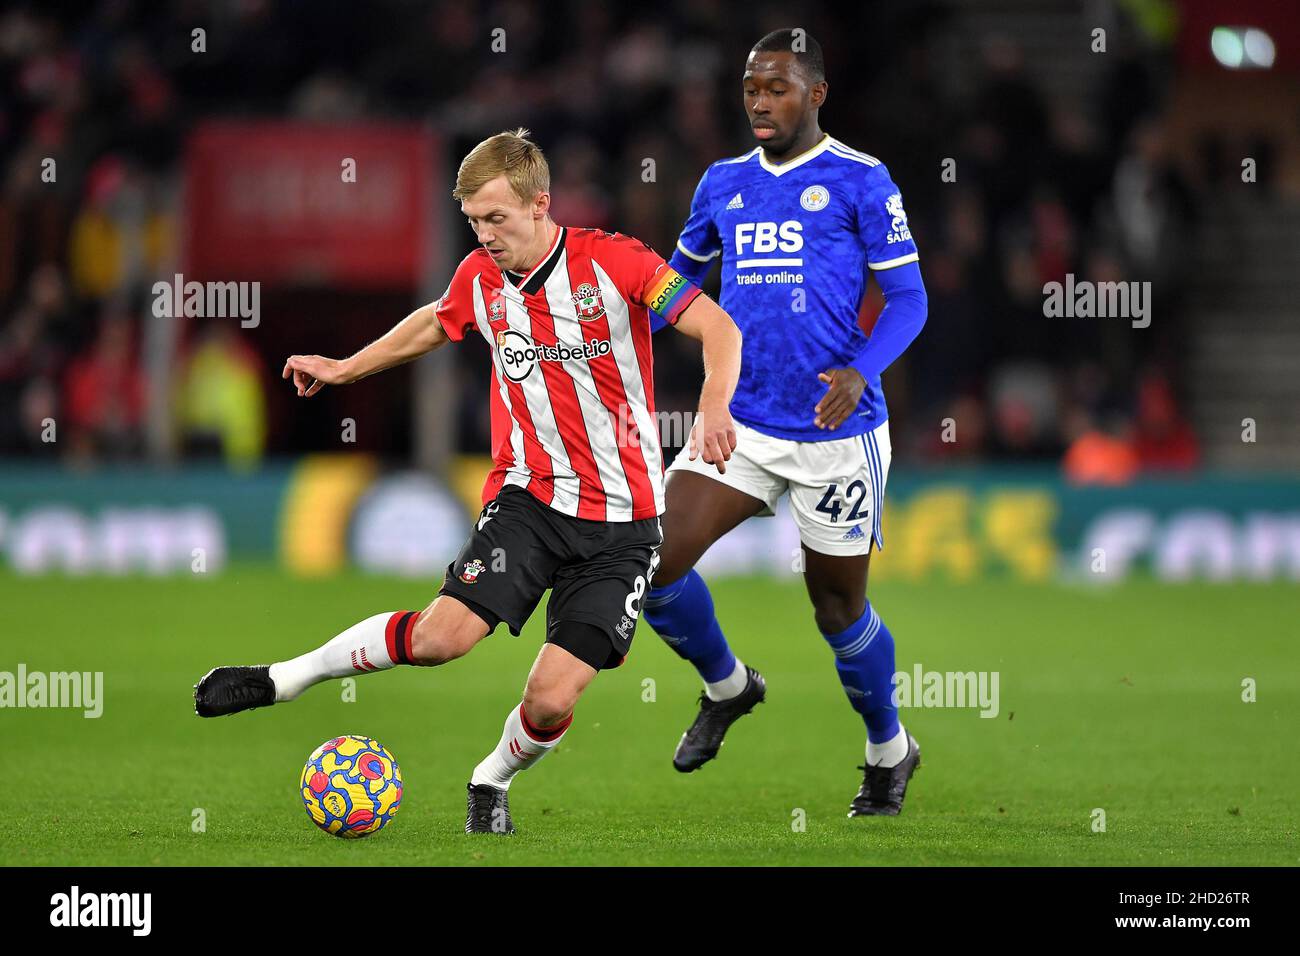 James Ward-Prowse of Southampton and Boubakary Soumare of Leicester City - Southampton v Leicester City, Premier League, St Mary's Stadium, Southampton, UK - 1st December 2021  Editorial Use Only - DataCo restrictions apply Stock Photo